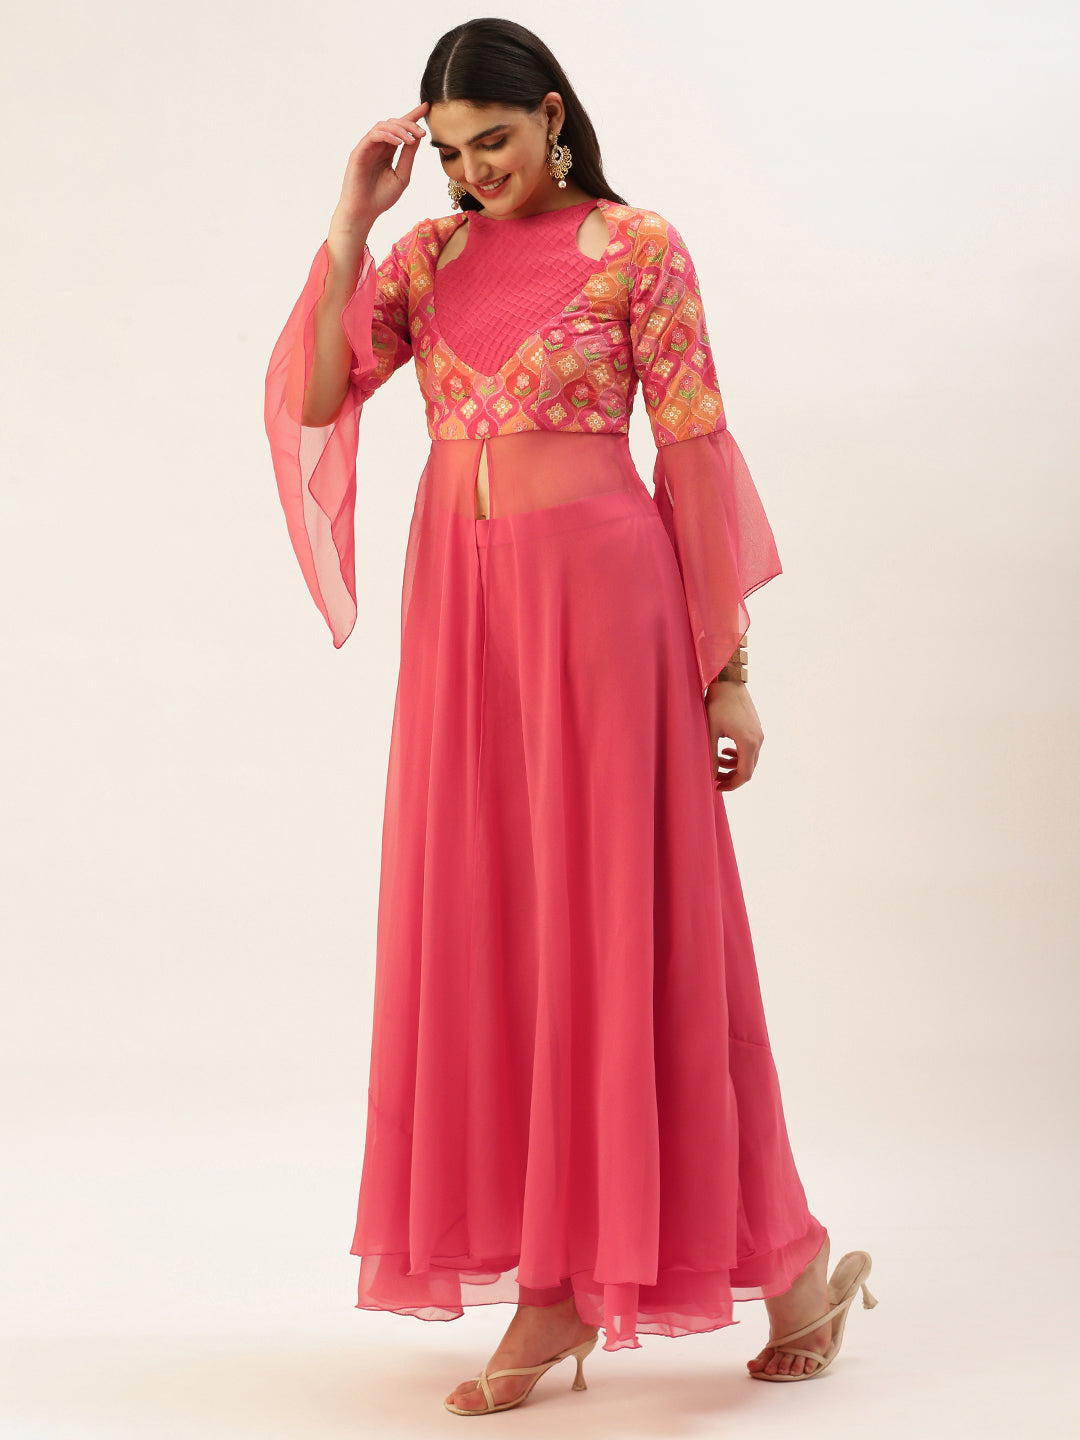 Multicolored-Embroidered-Anarkali-Suit